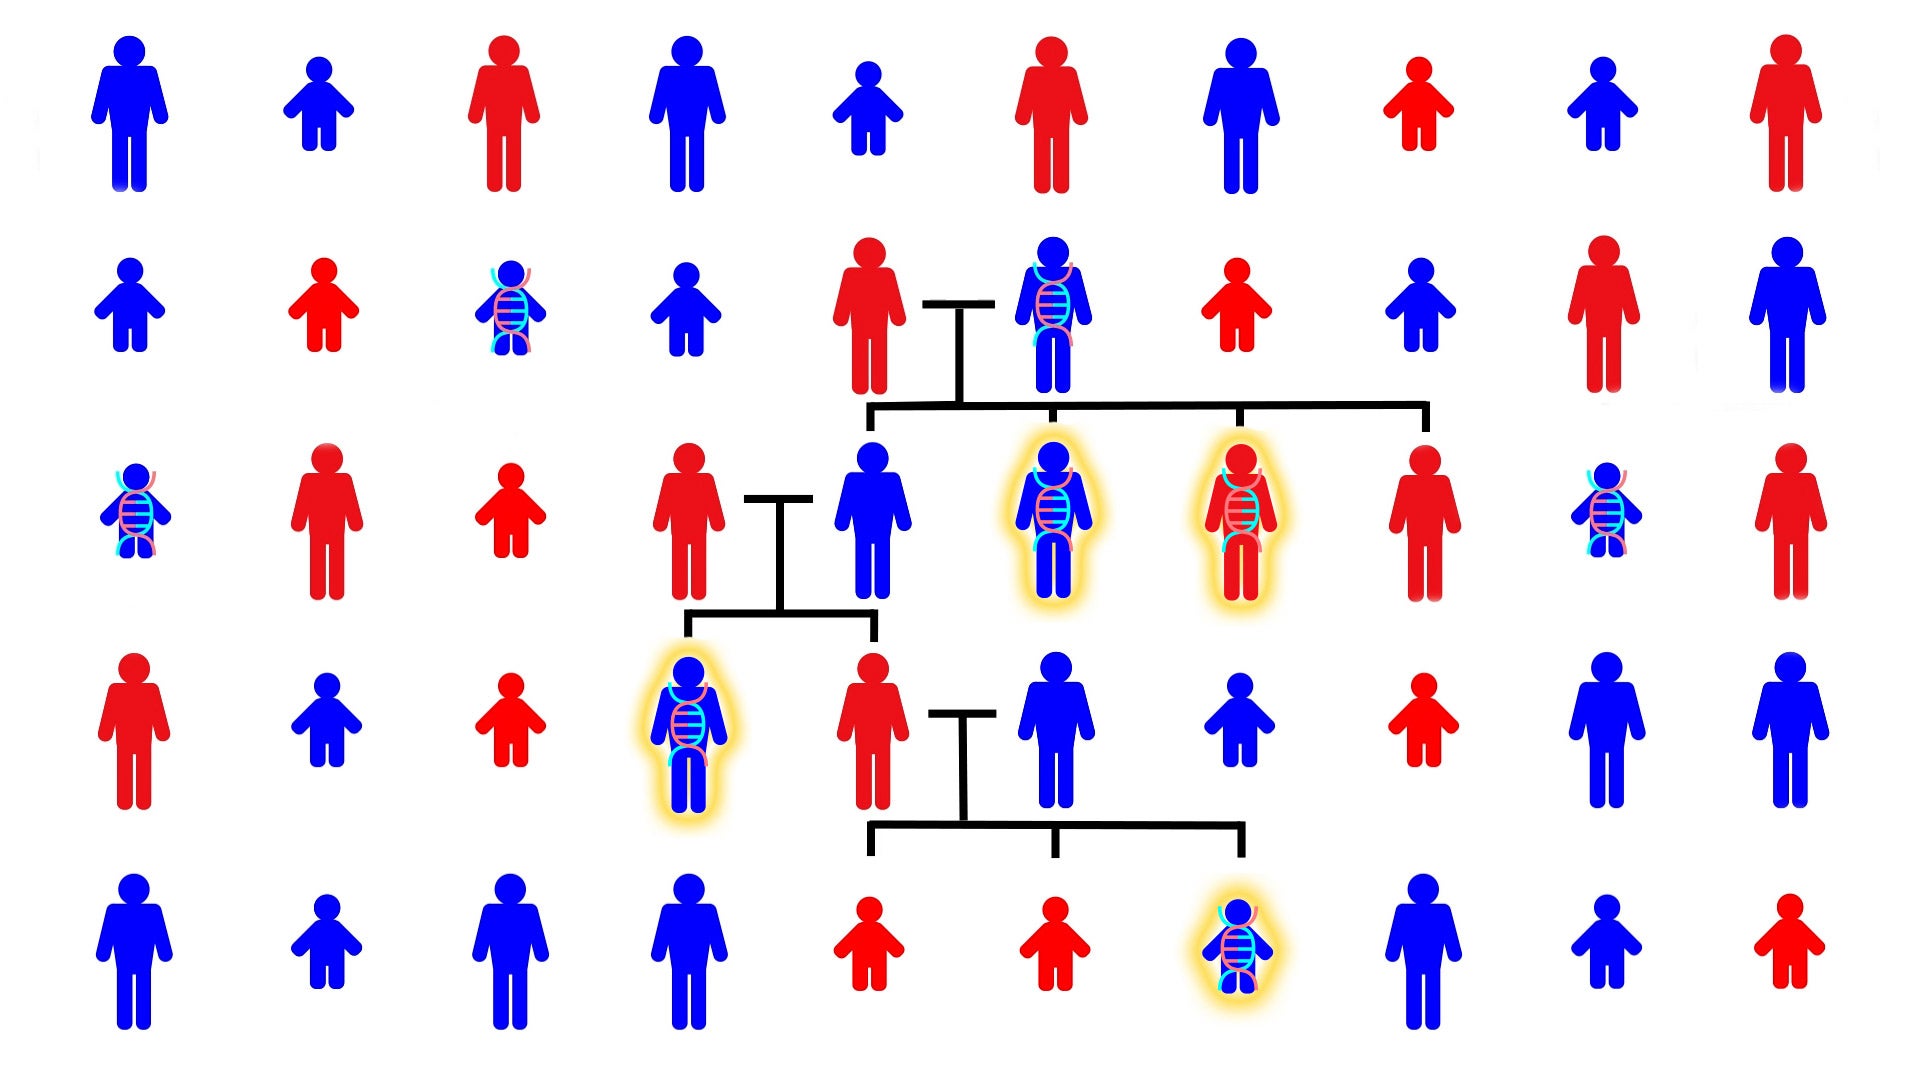 Illustration of autism in a family tree